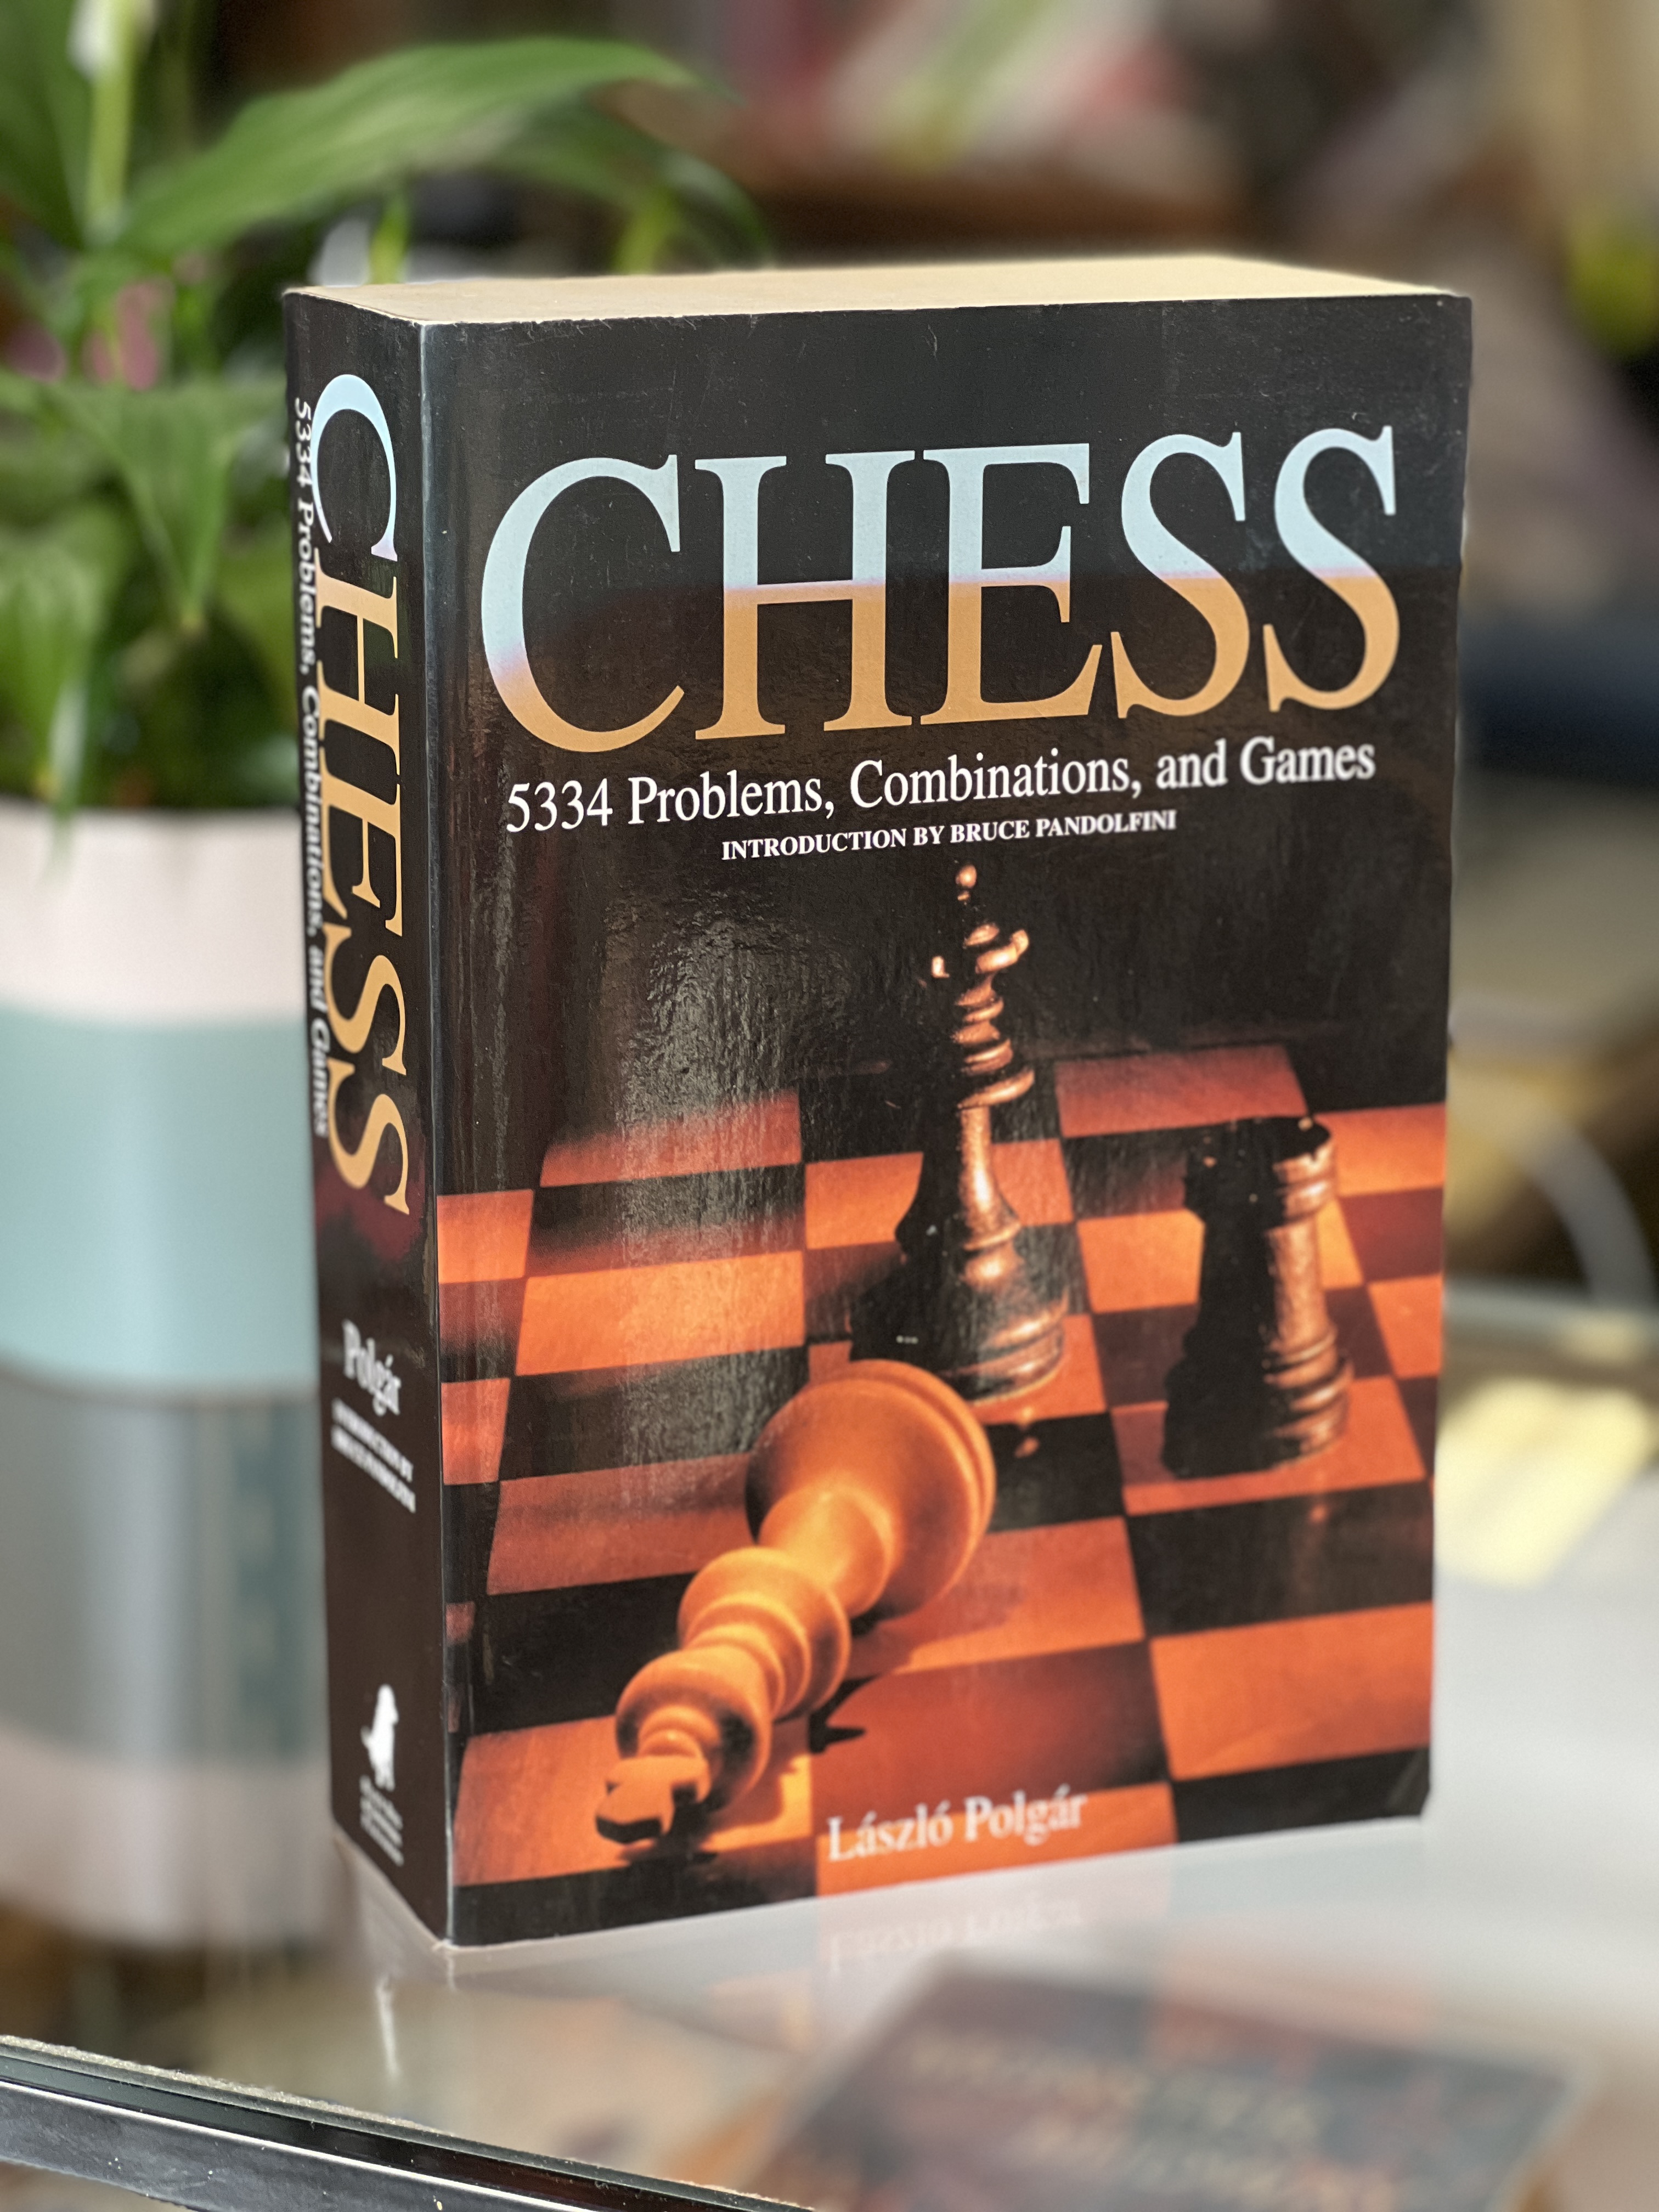 Chess 5334 Problems, Combinations, and Games